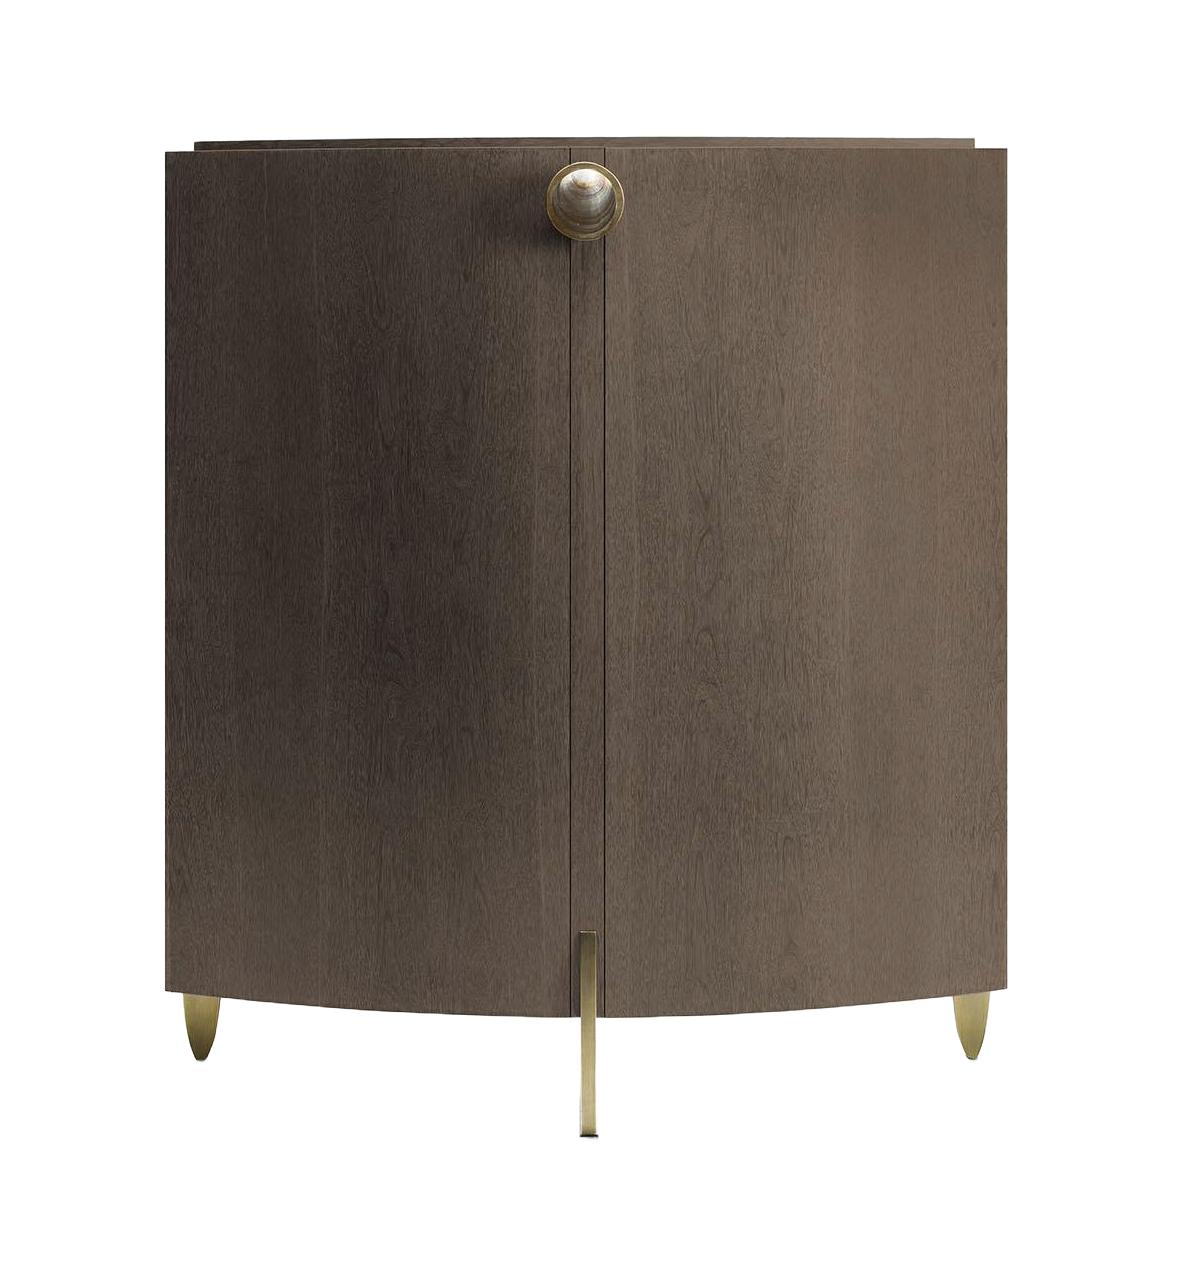 Pearl Gloss Cabinet with Bronze Accents